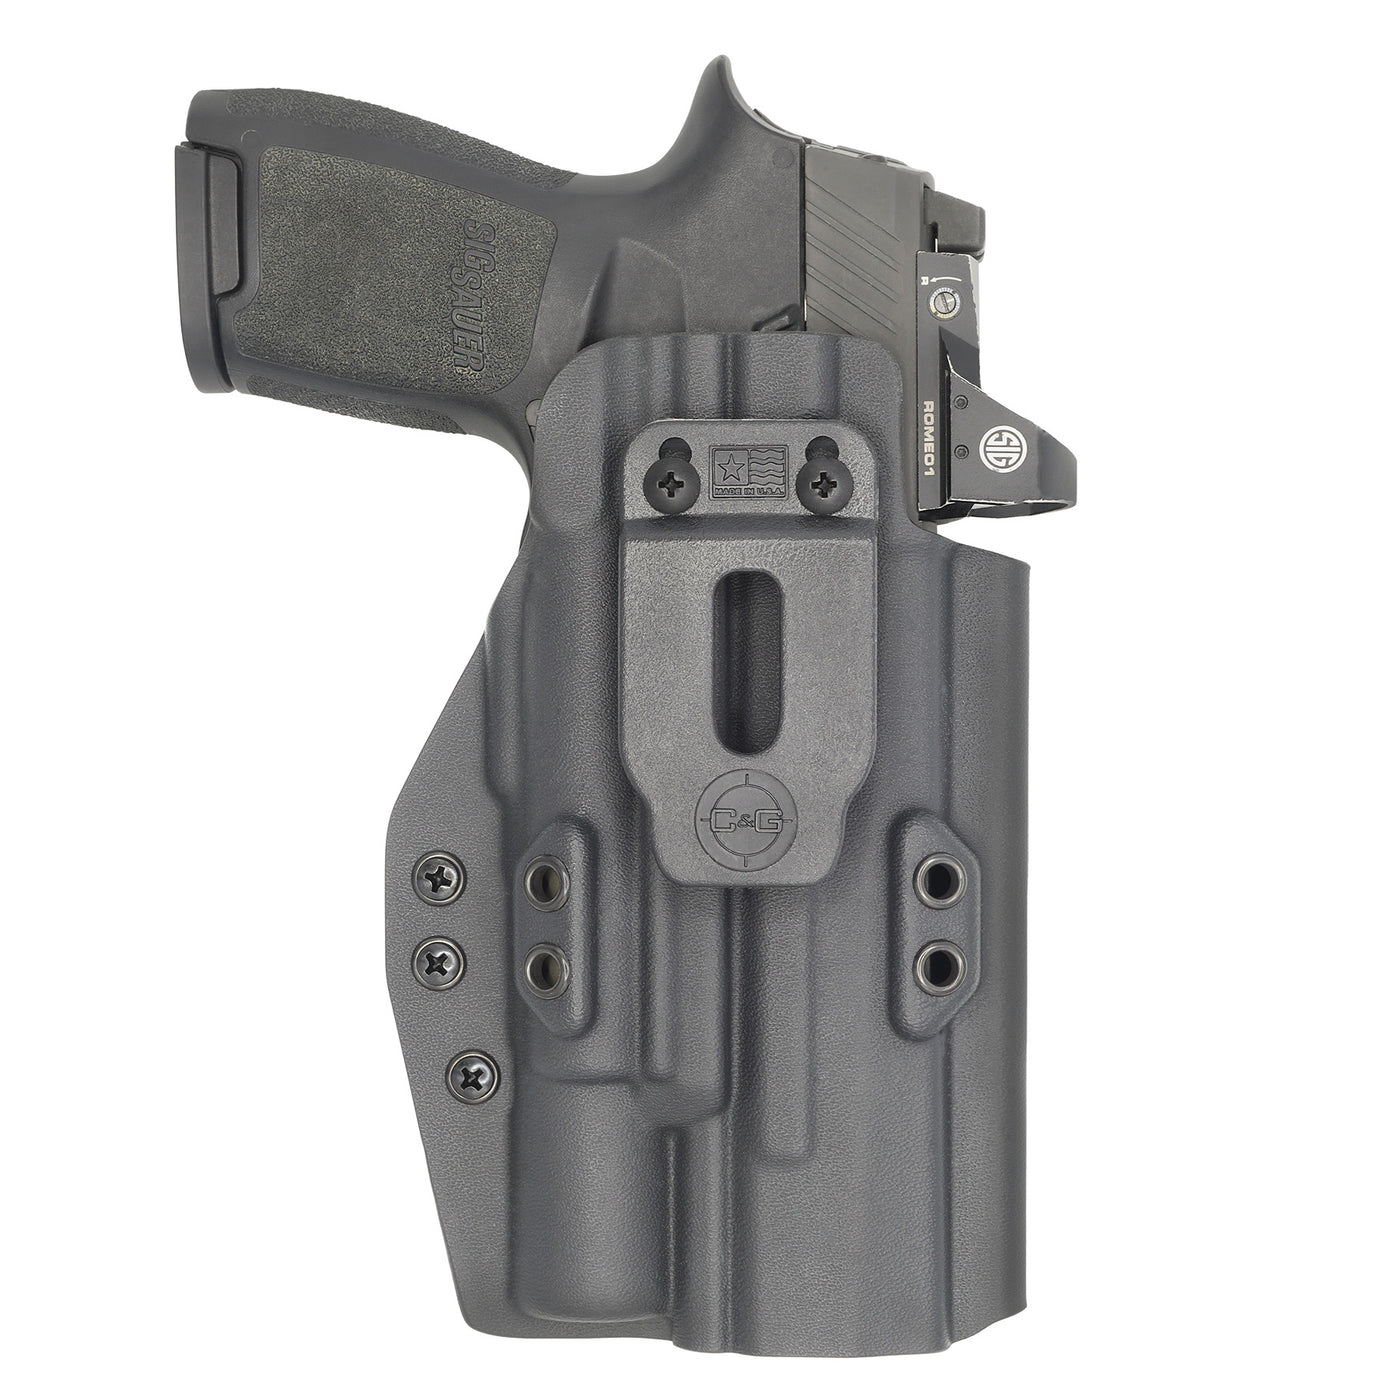 C&G holsters custom IWB Tactical FNX45T Surefire X300 in holstered position